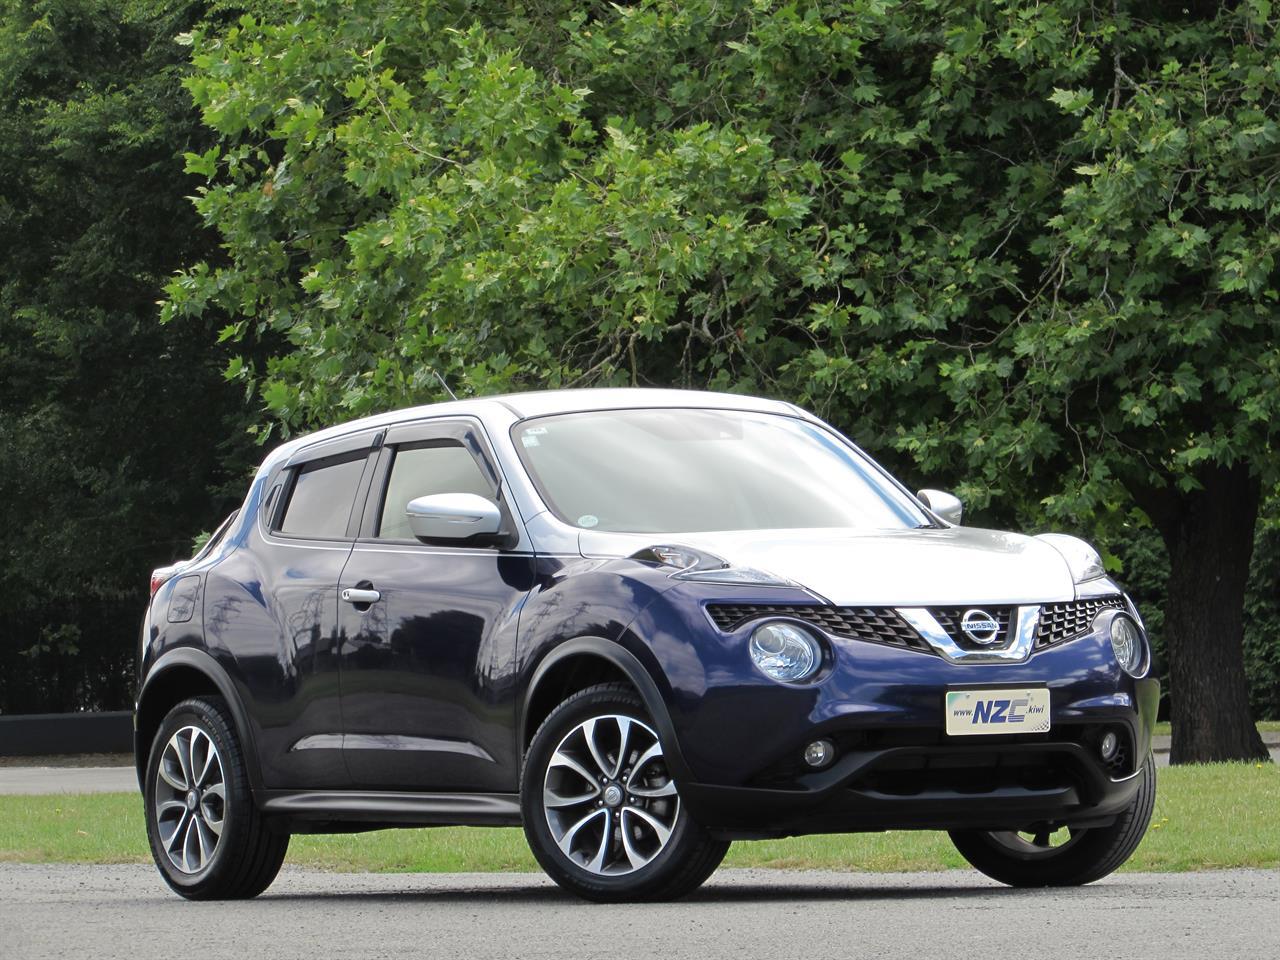 NZC best hot price for 2016 Nissan JUKE in Christchurch